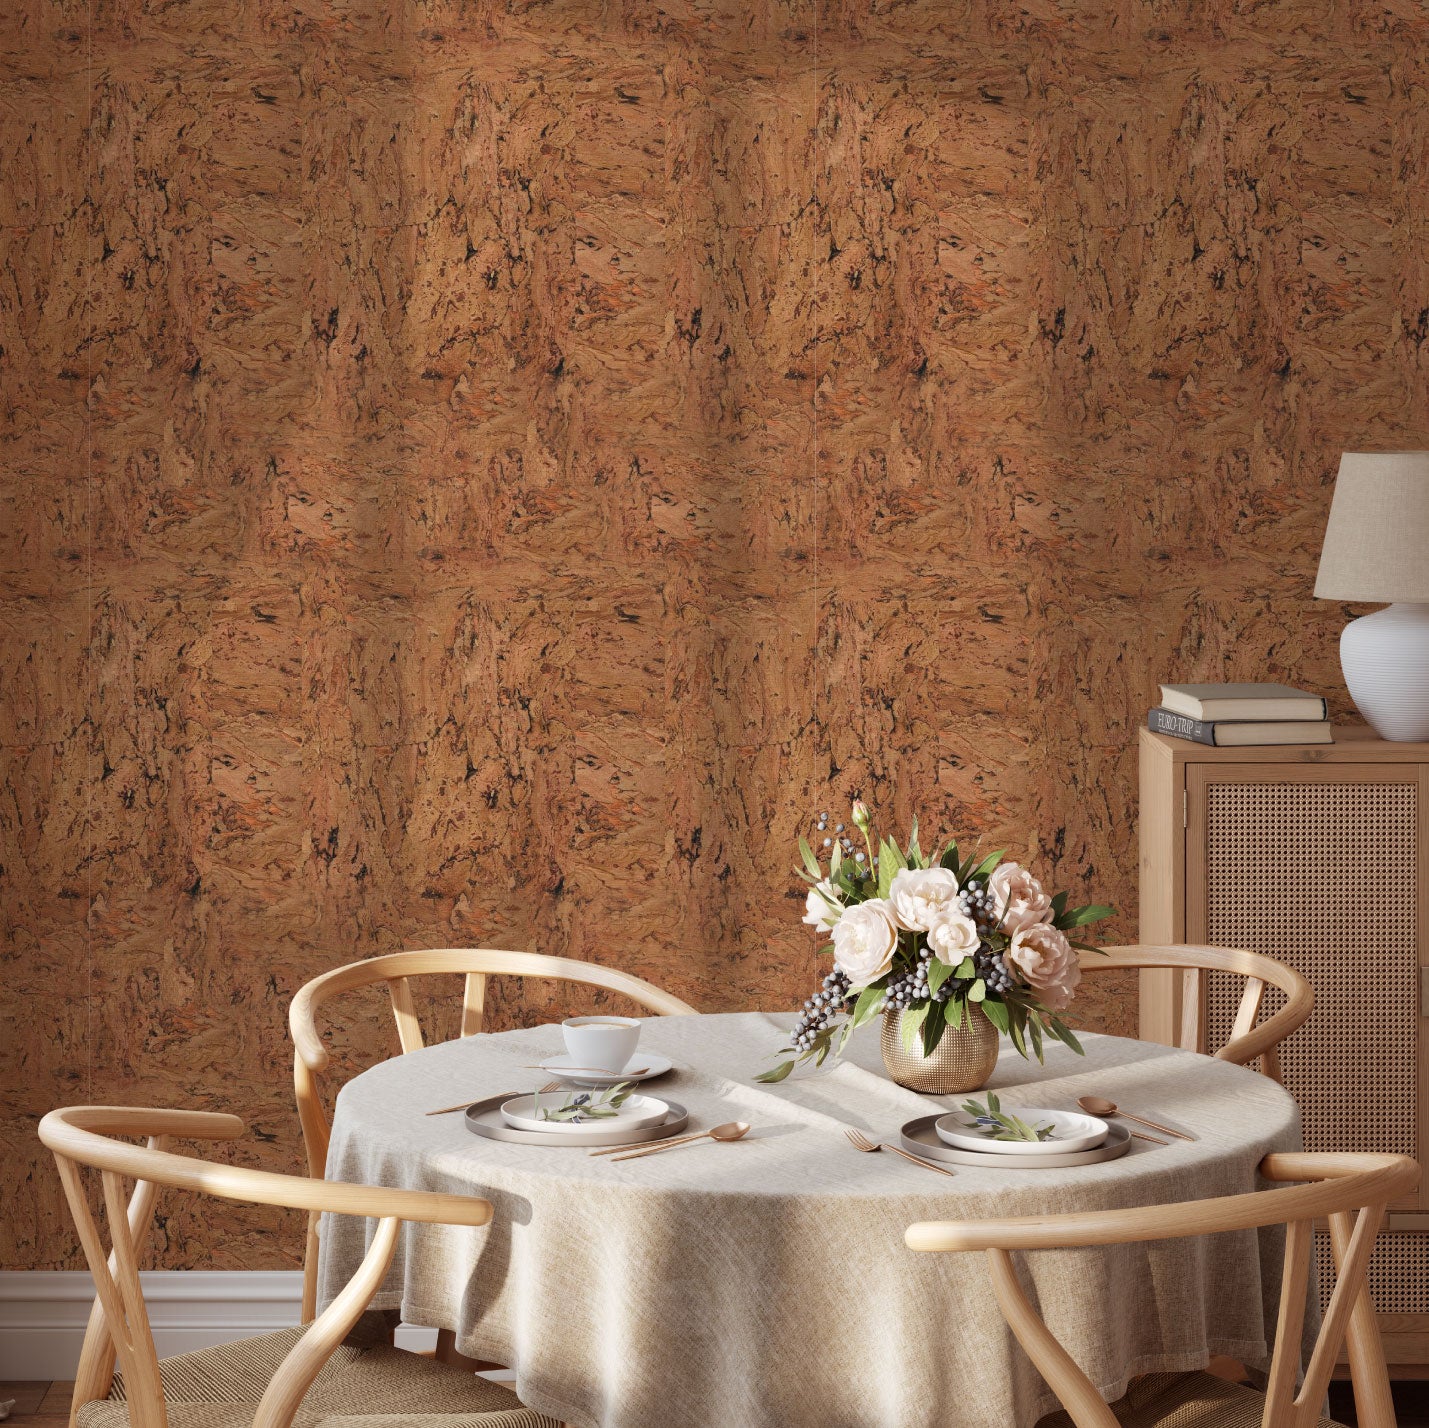 Natural Textured Eco-Friendly Non-toxic High-quality  Sustainable practices Sustainability Interior Design Wall covering Bold Wallpaper Custom Tailor-made Retro chic cork nature luxury metallic shiny wood timeless coastal vacation interior design grain high-end dark brown light dining room